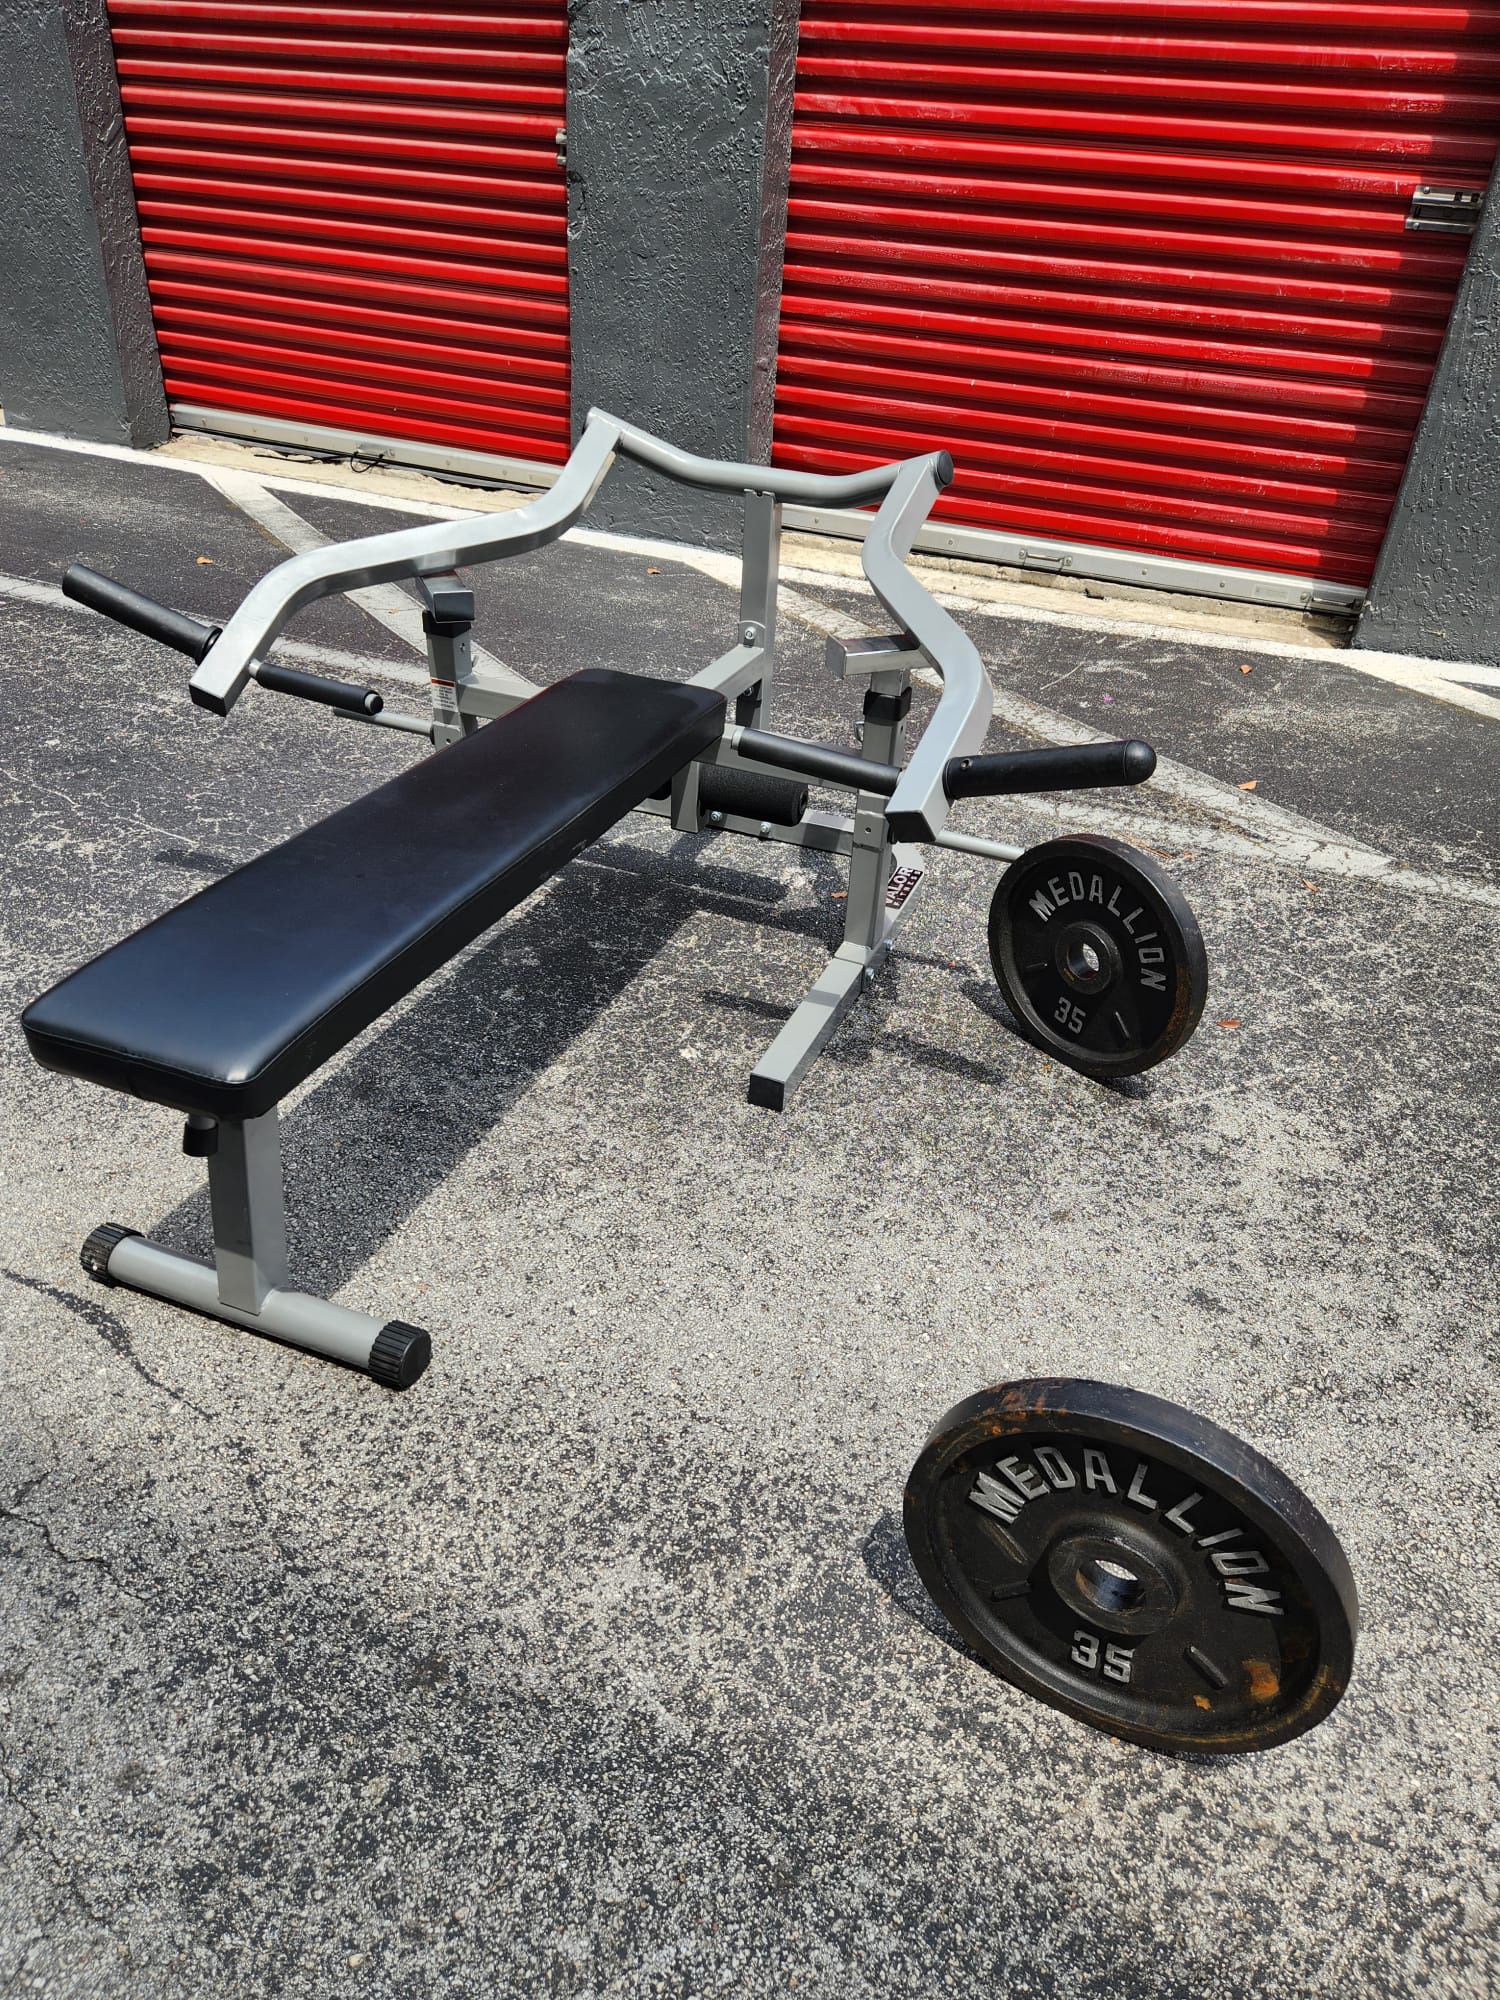 Home Gym Chest Press Machine with 2x35s